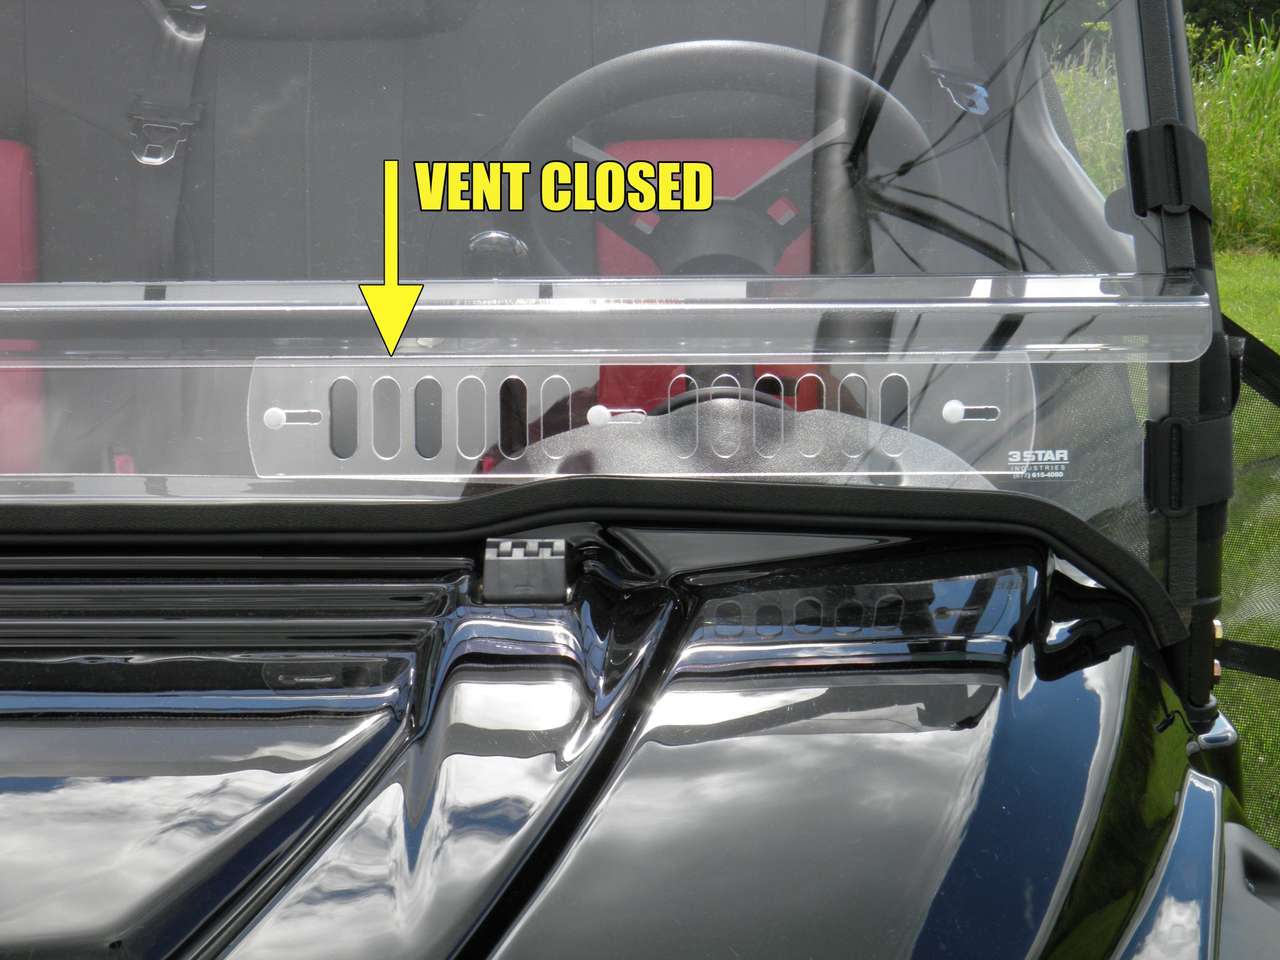 3 Star side x side accessories Polaris RZR 4 900/XP 4 1000/XP 4 Turbo 1-Pc Scratch-Resistant Windshield vents closed